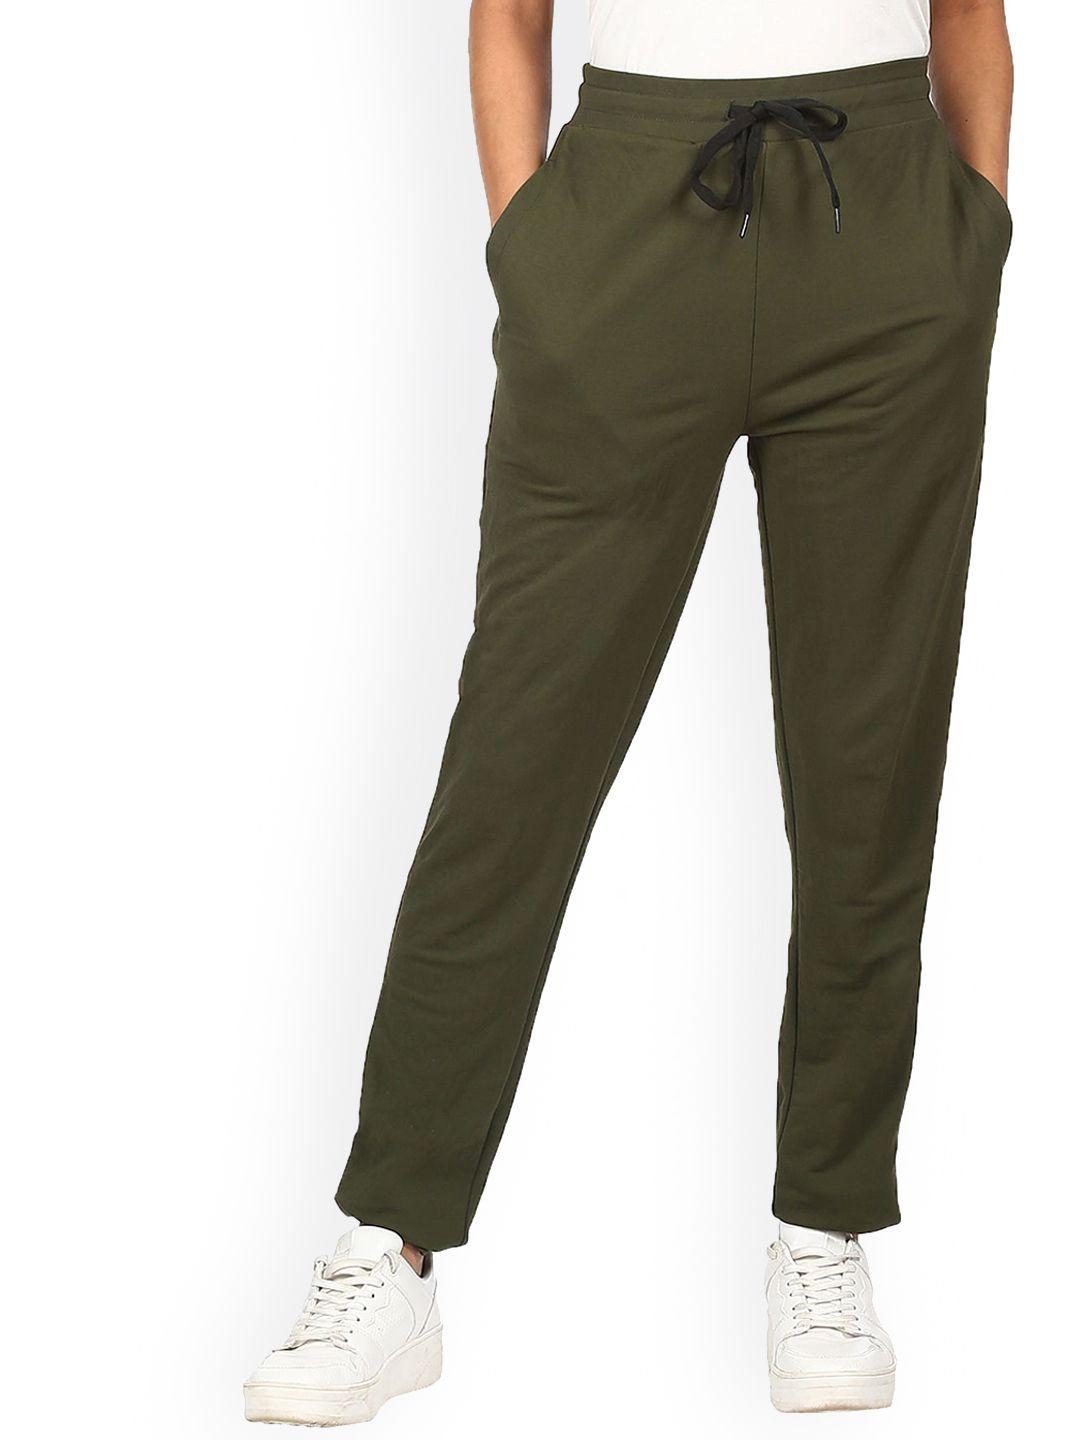 sugr-women-olive-green-solid-track-pants